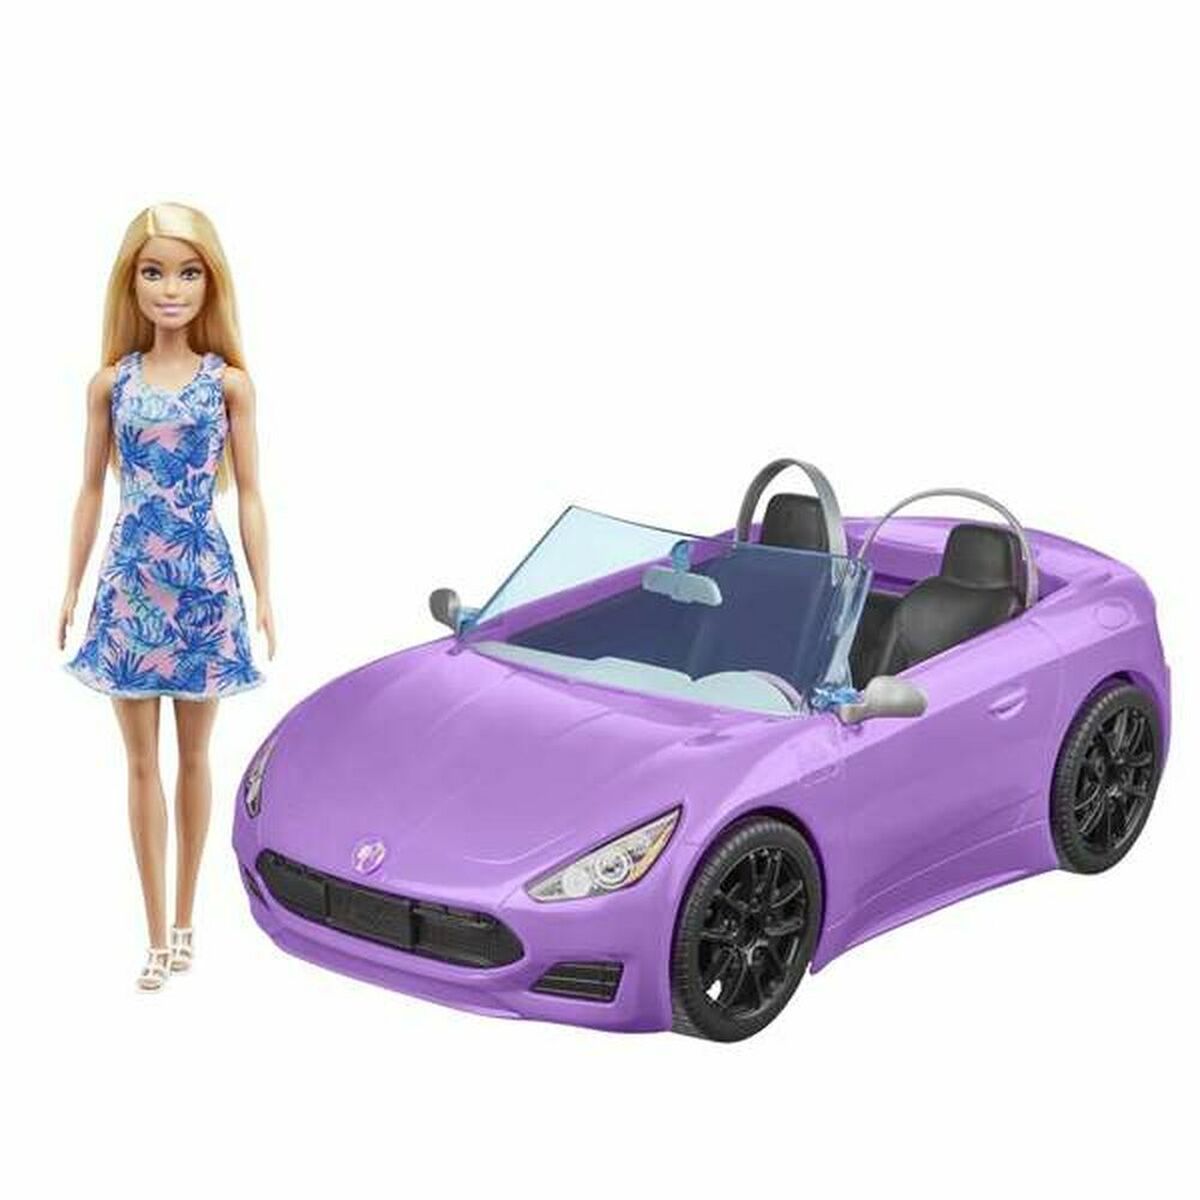 Doll Mattel Barbie And Her Purple Convertible